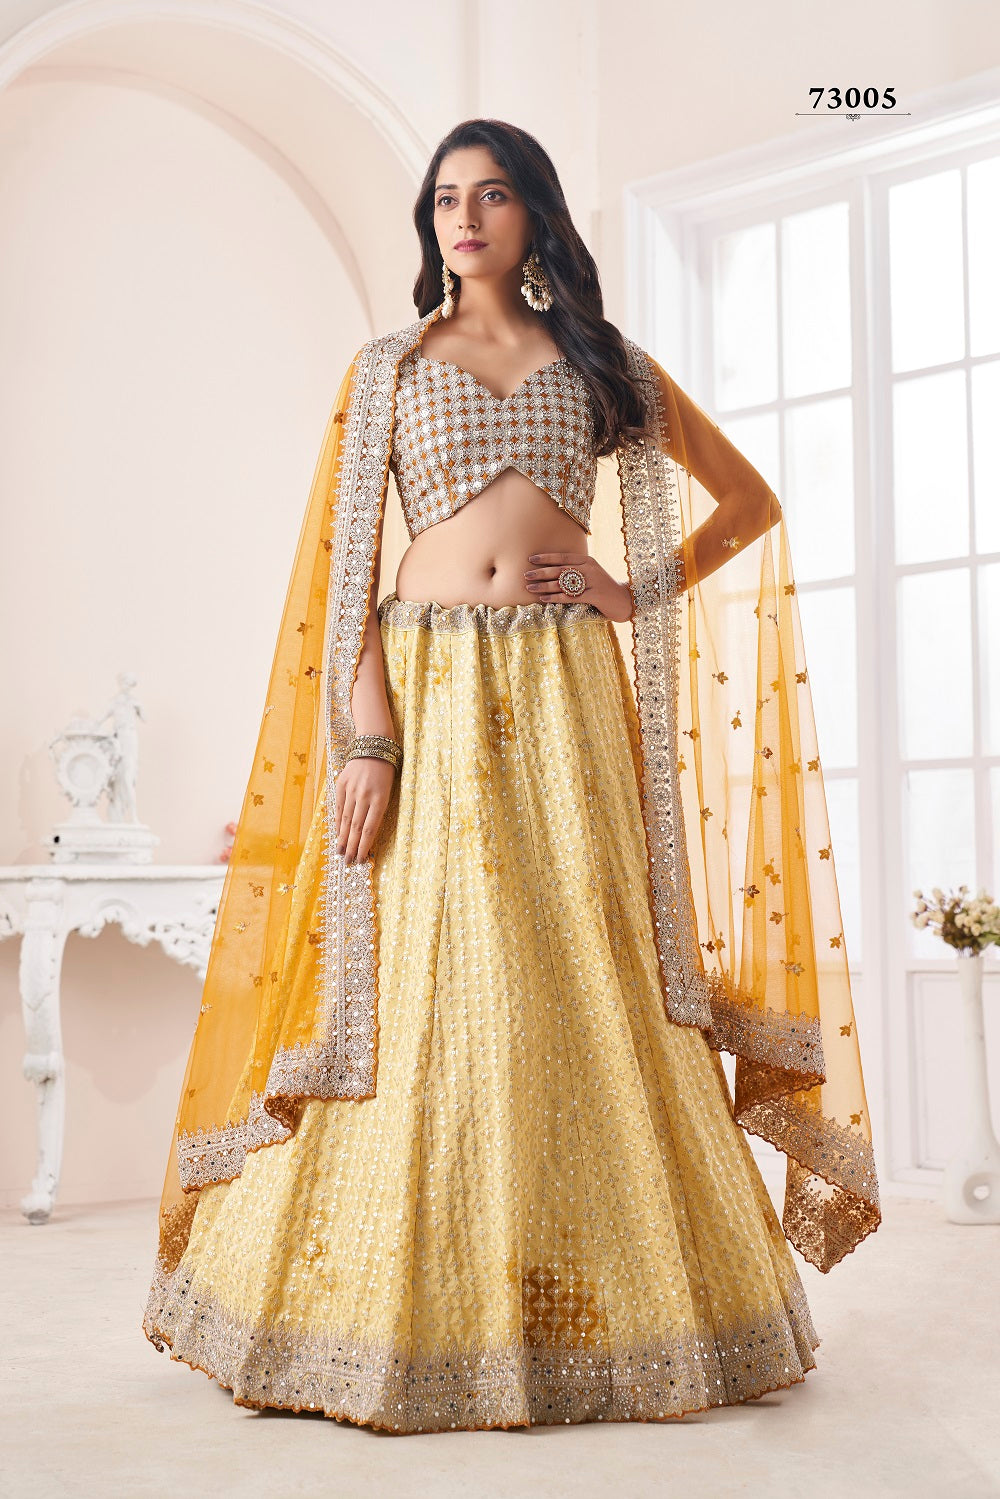 RE - Multi Colored Mouch Satin Mirror Work Lehenga Choli - Featured Product